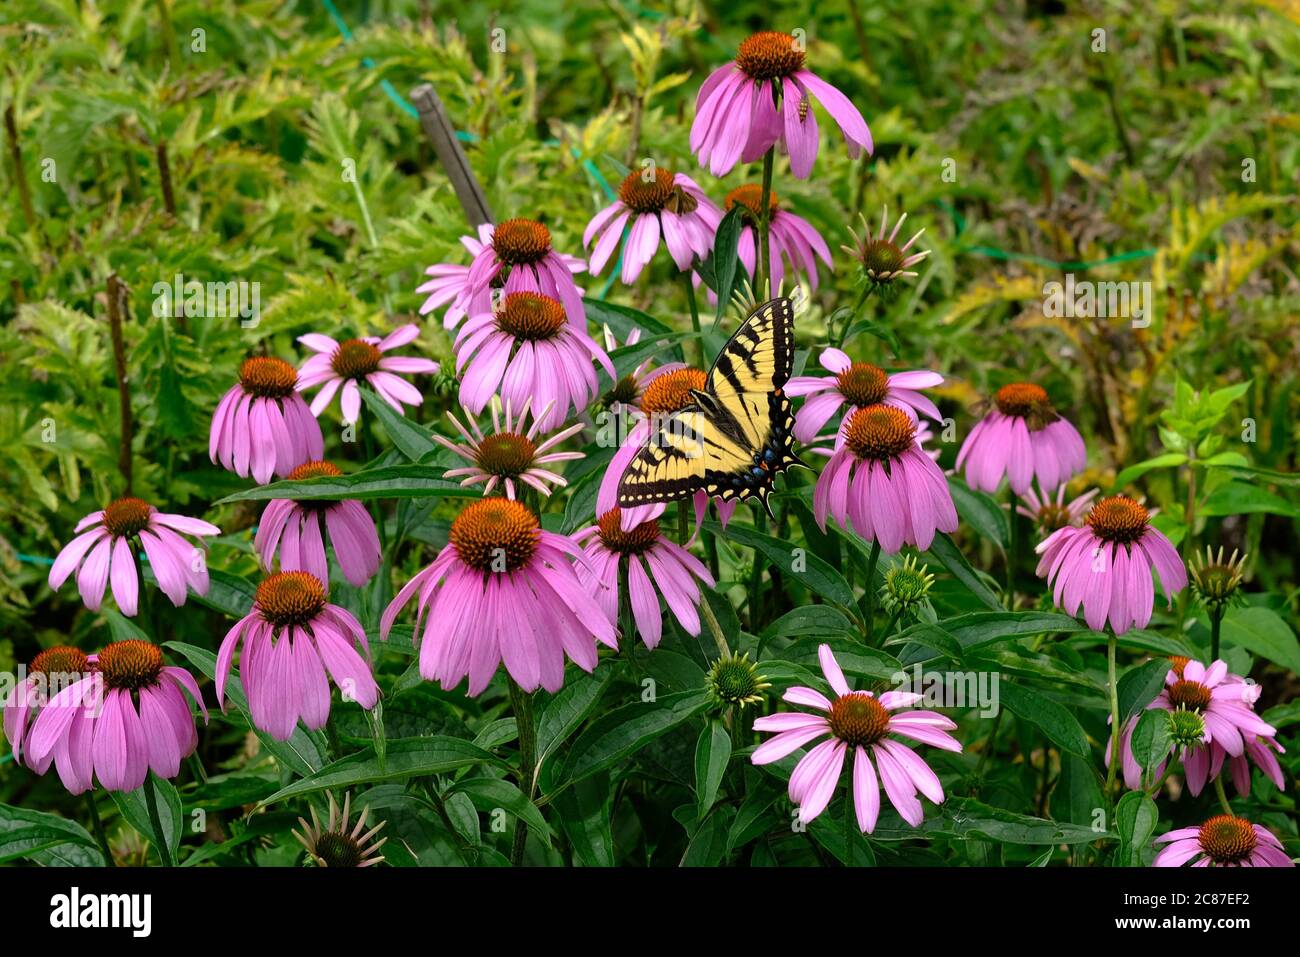 Canadian Tiger Swallowtail (Papilio canadensis) on a purple coneflower (Echinacea purpurea) at Mackenzie King Estate gardens, Quebec, Canada. Stock Photo